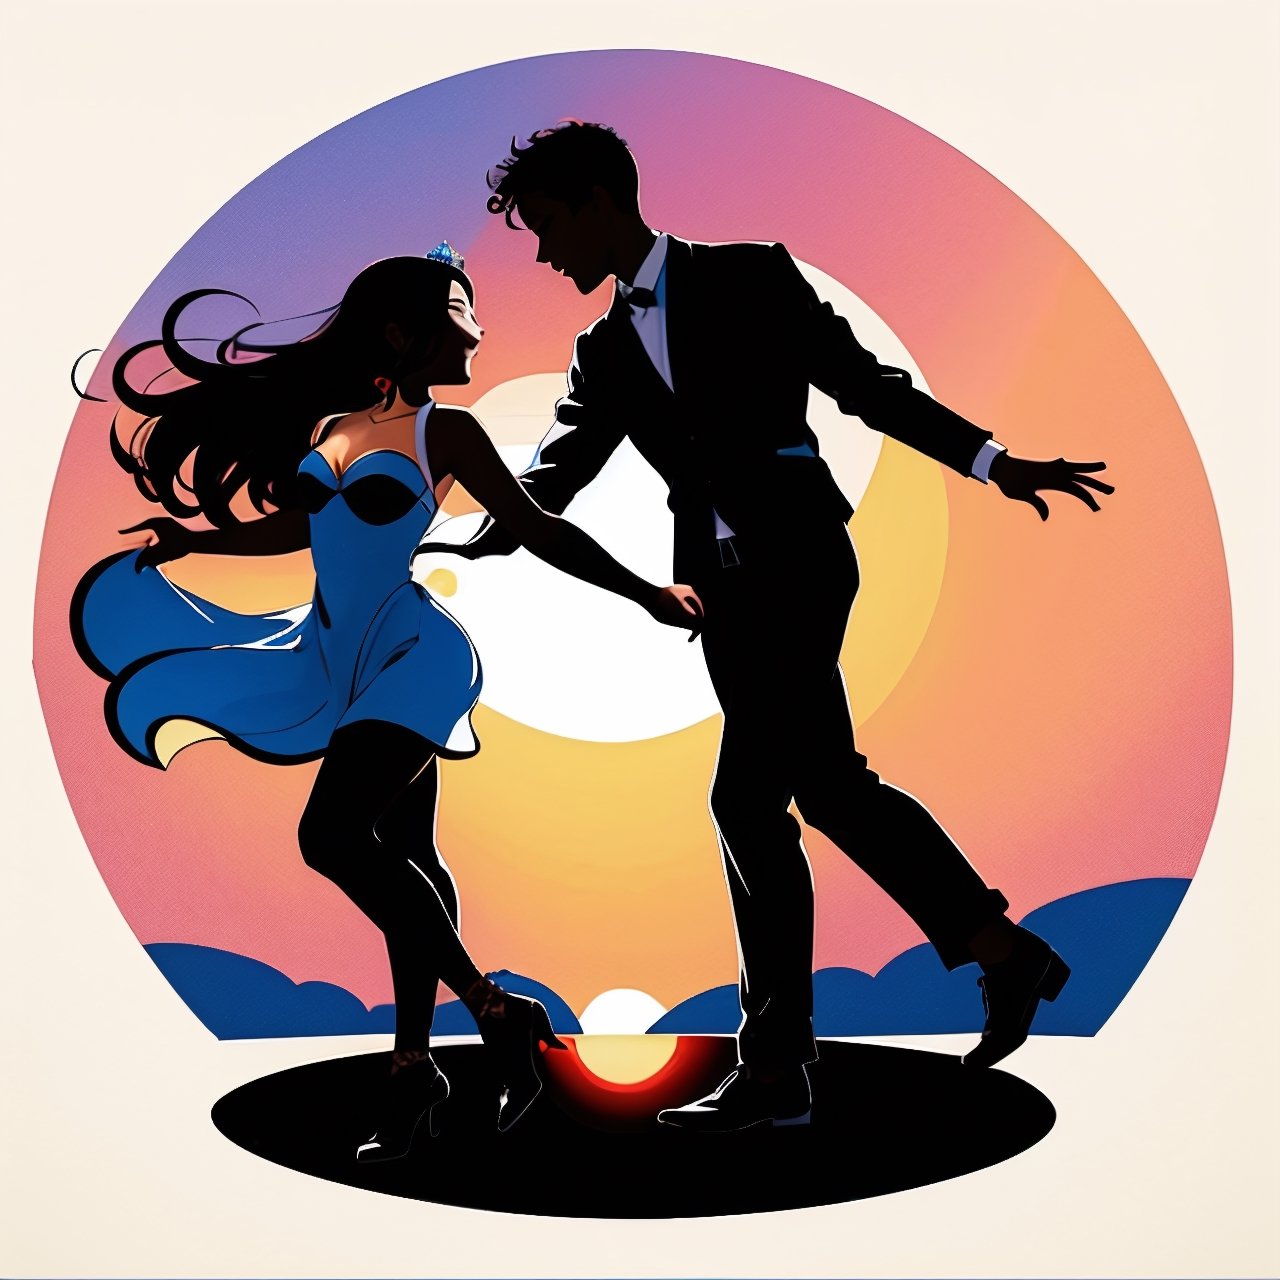 Dark silhowette of a couple dancing, set inside a round sunset background, against a single white five pointed star, colorful background,1 line drawing